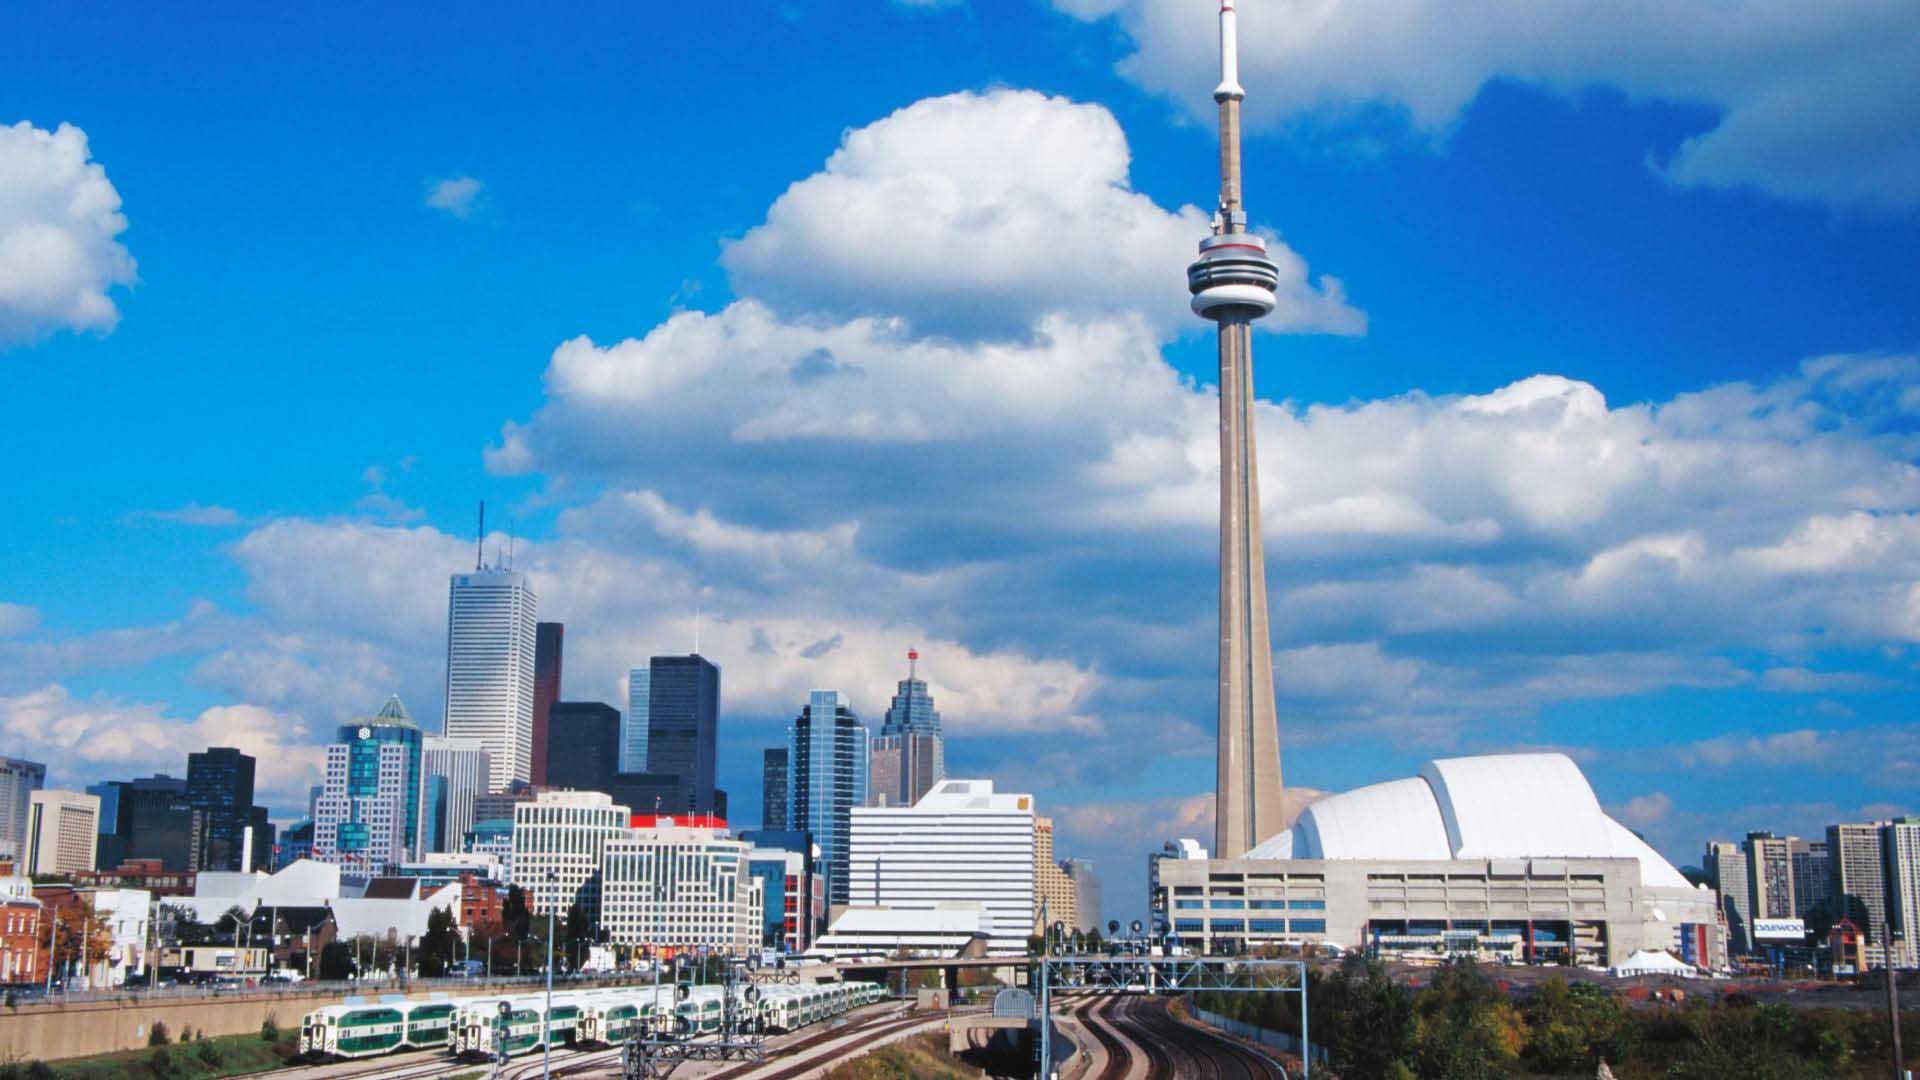 Travel Famous Places To Travel. Best places to travel, Canadian national railway, Toronto skyline